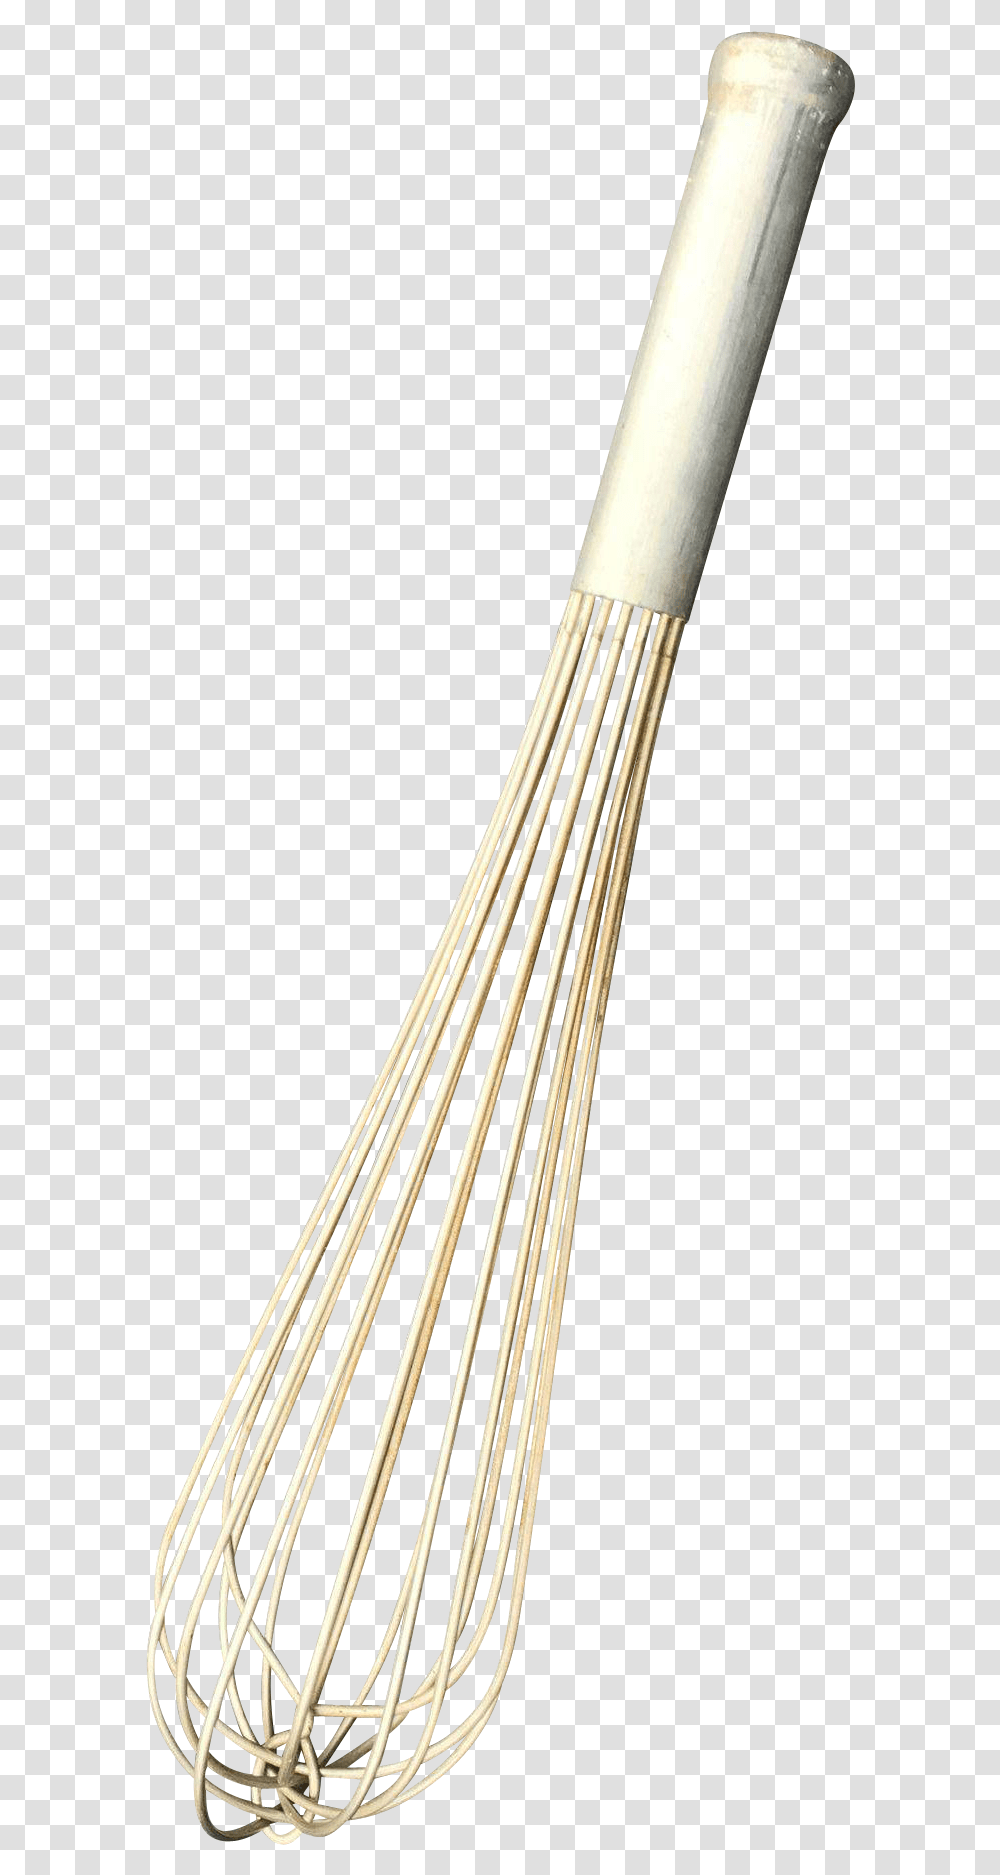 Whisk, Mixer, Appliance, Broom, Lute Transparent Png